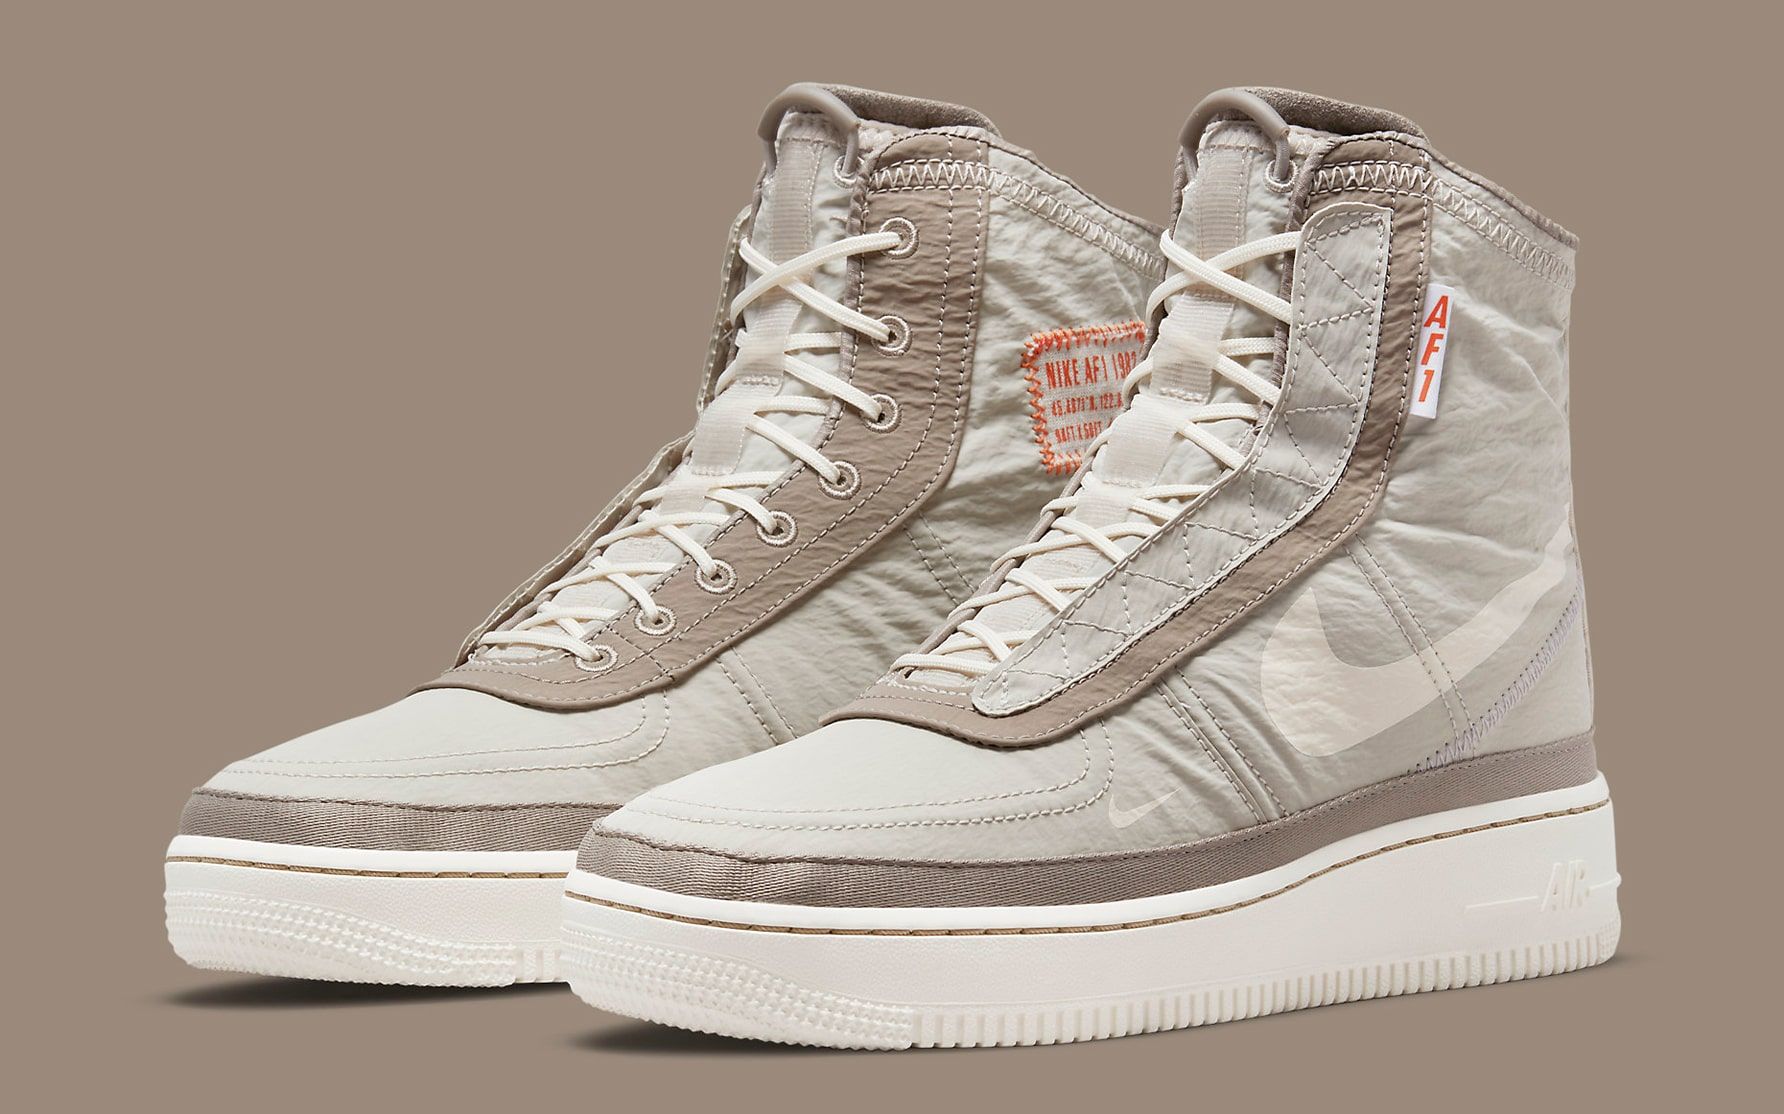 Nike Air Force 1 Shell Surfaces in "Bone" | HOUSE OF HEAT